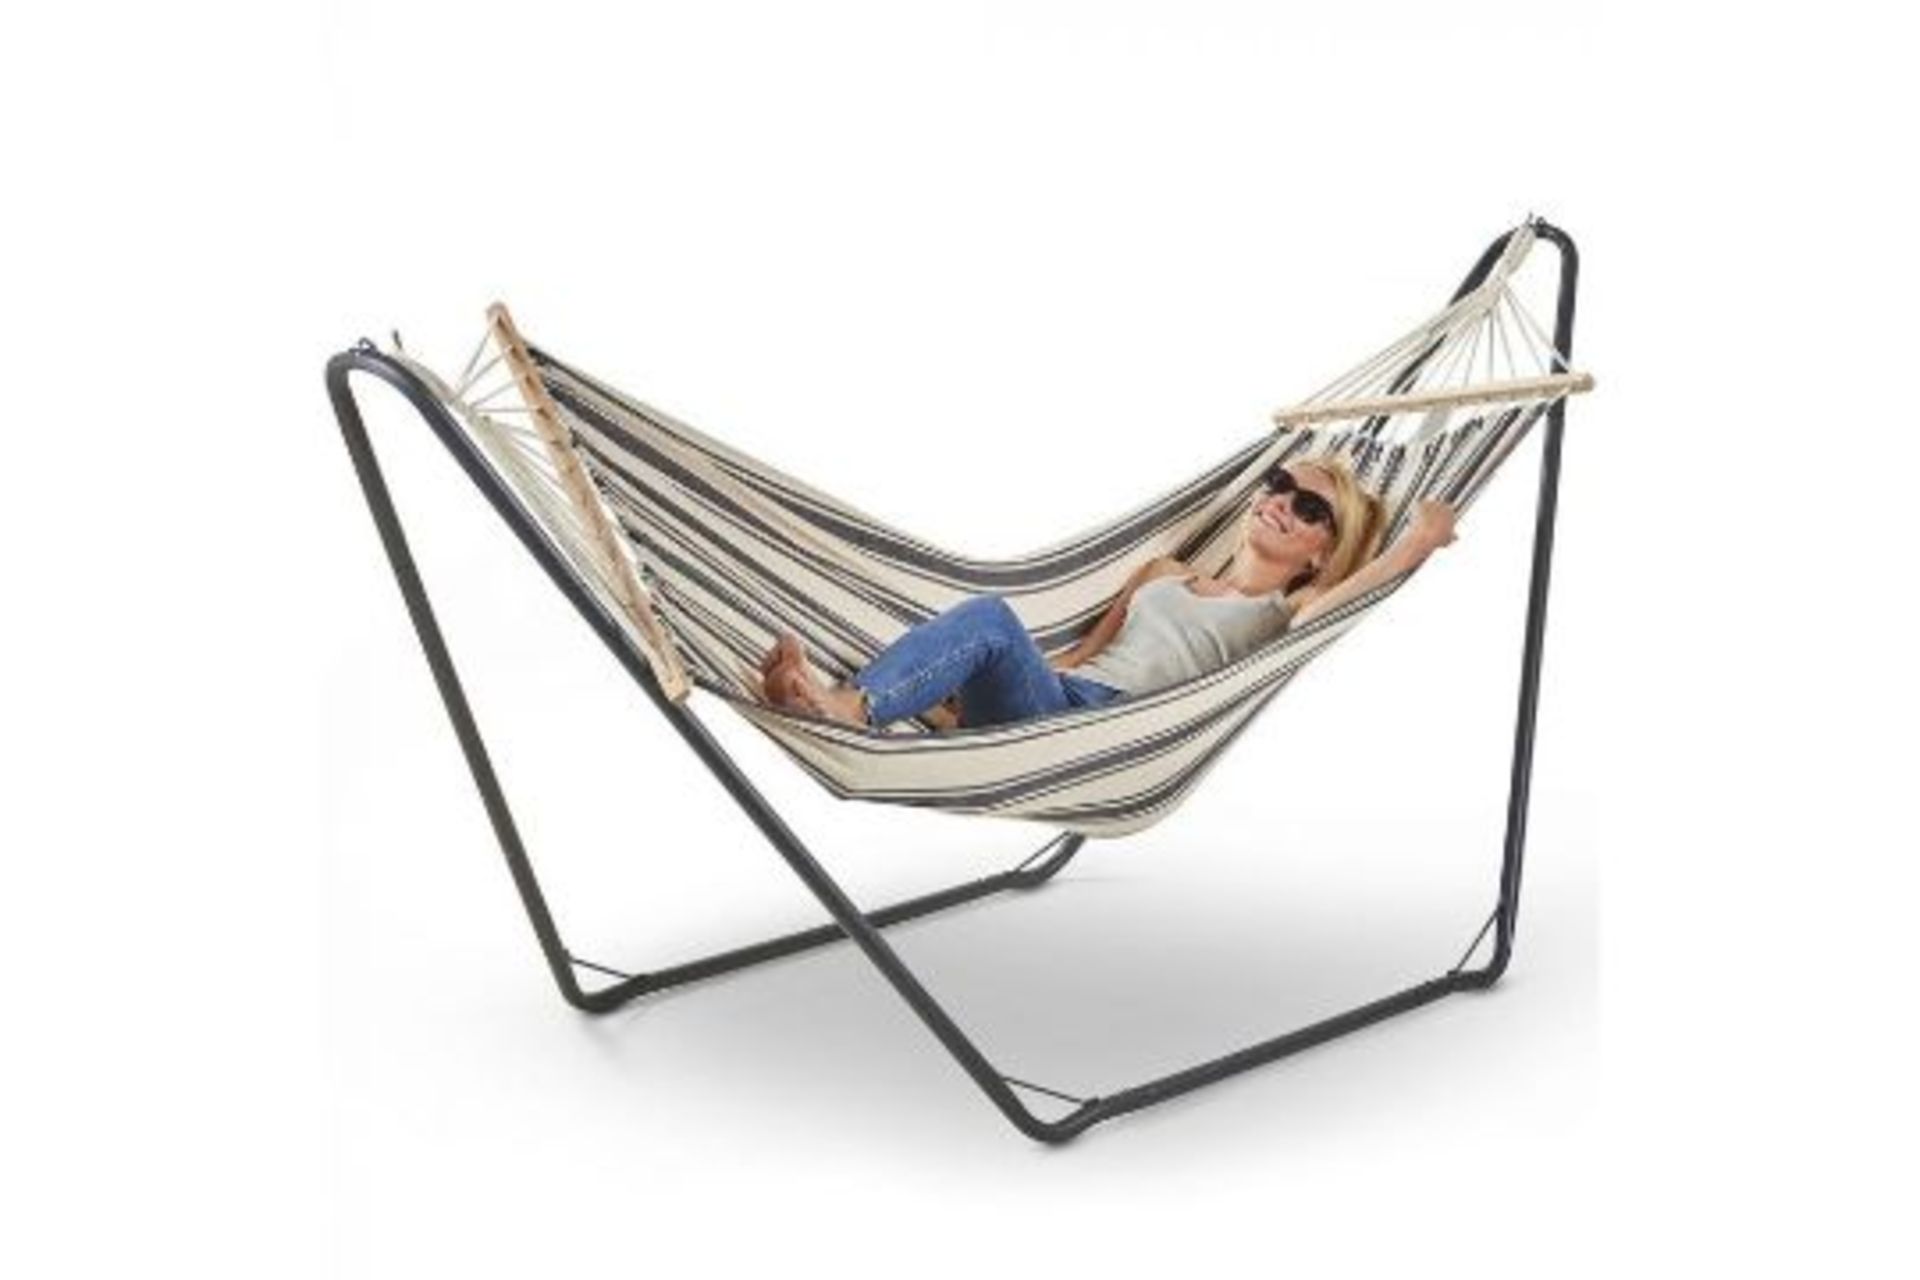 New Boxed - Hammock with Frame. (REF006-ROW6) Hanging around never felt as good! The 100% striped